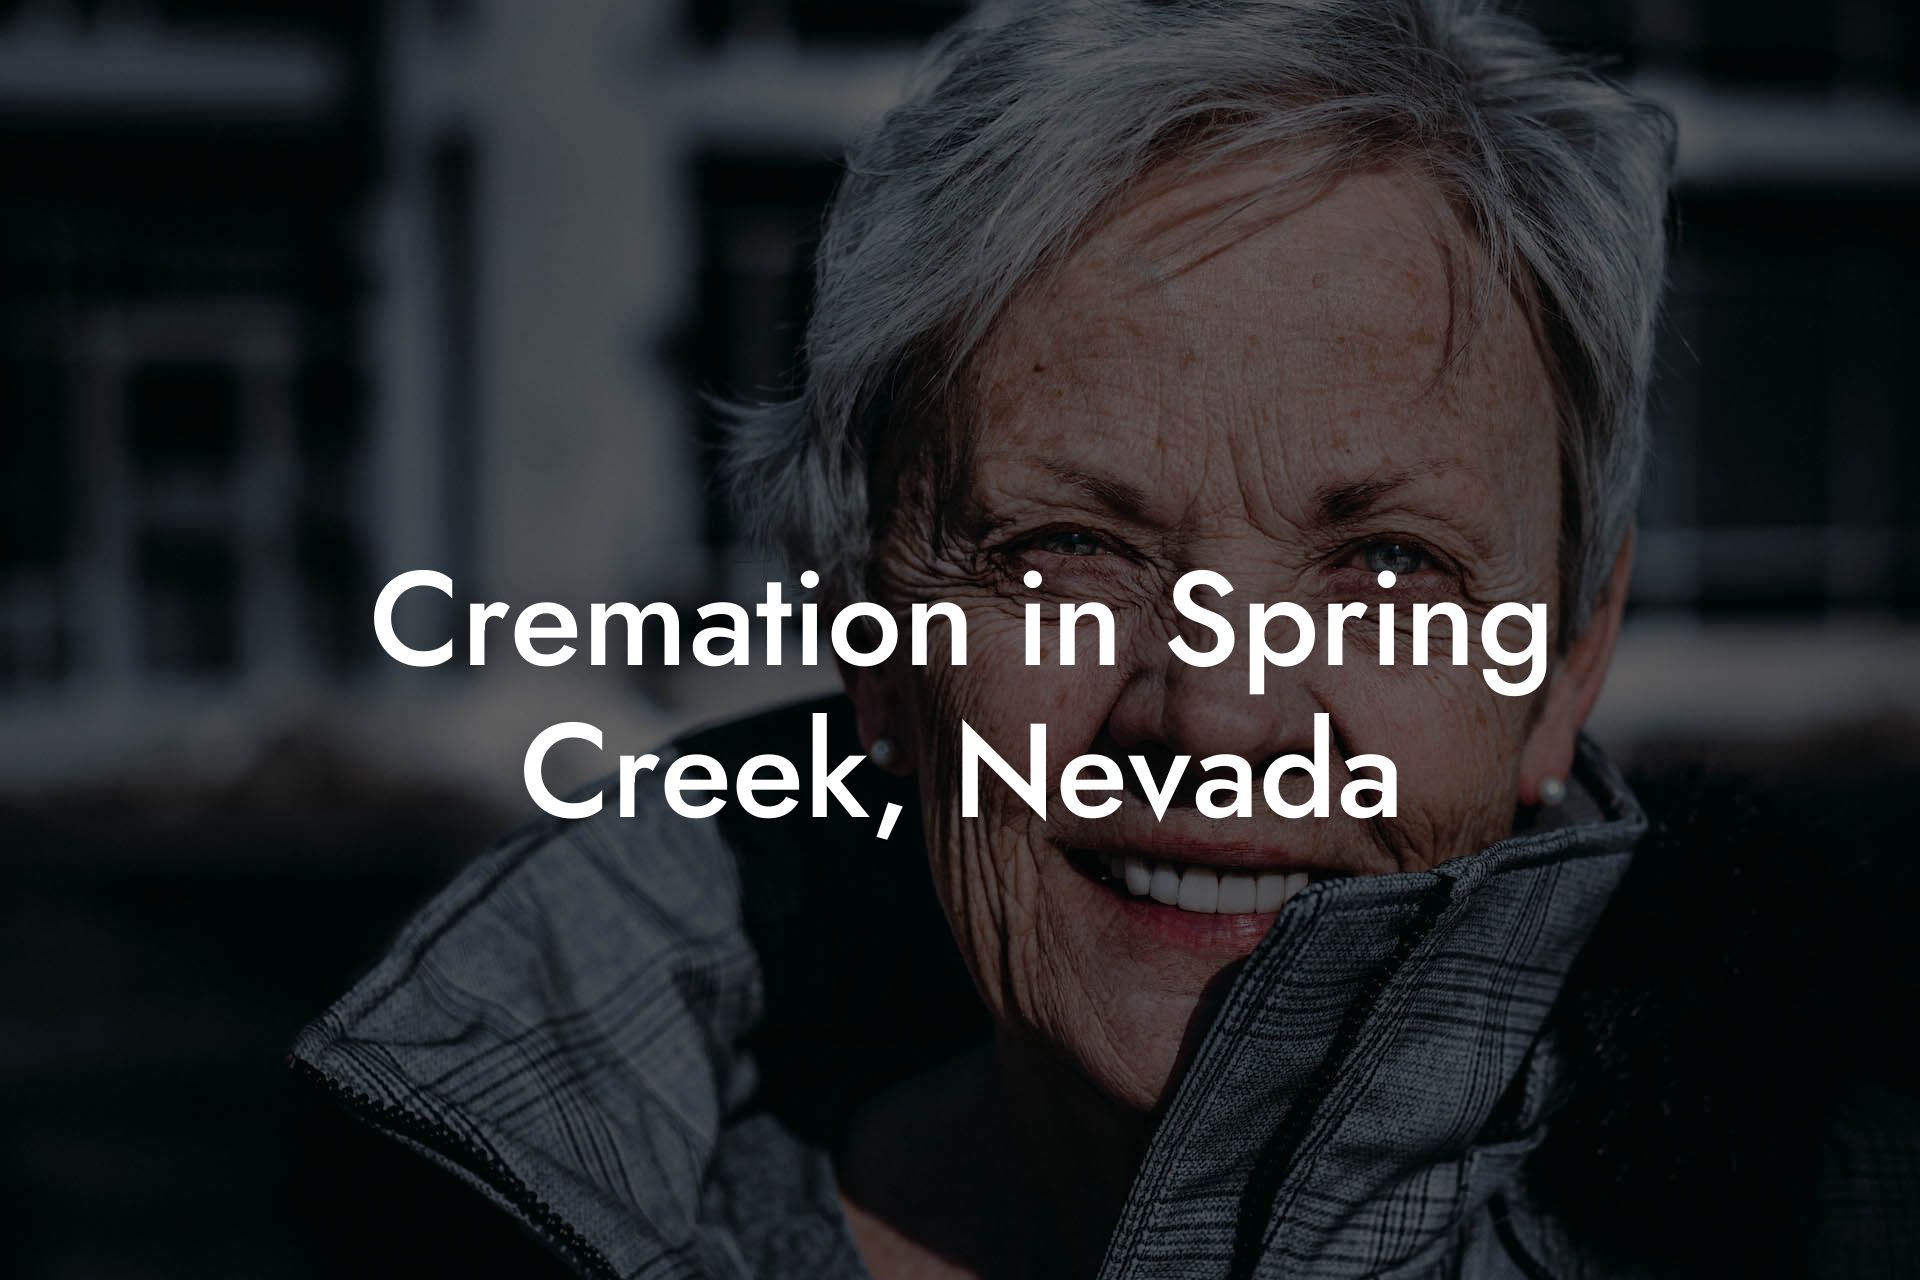 Cremation in Spring Creek, Nevada